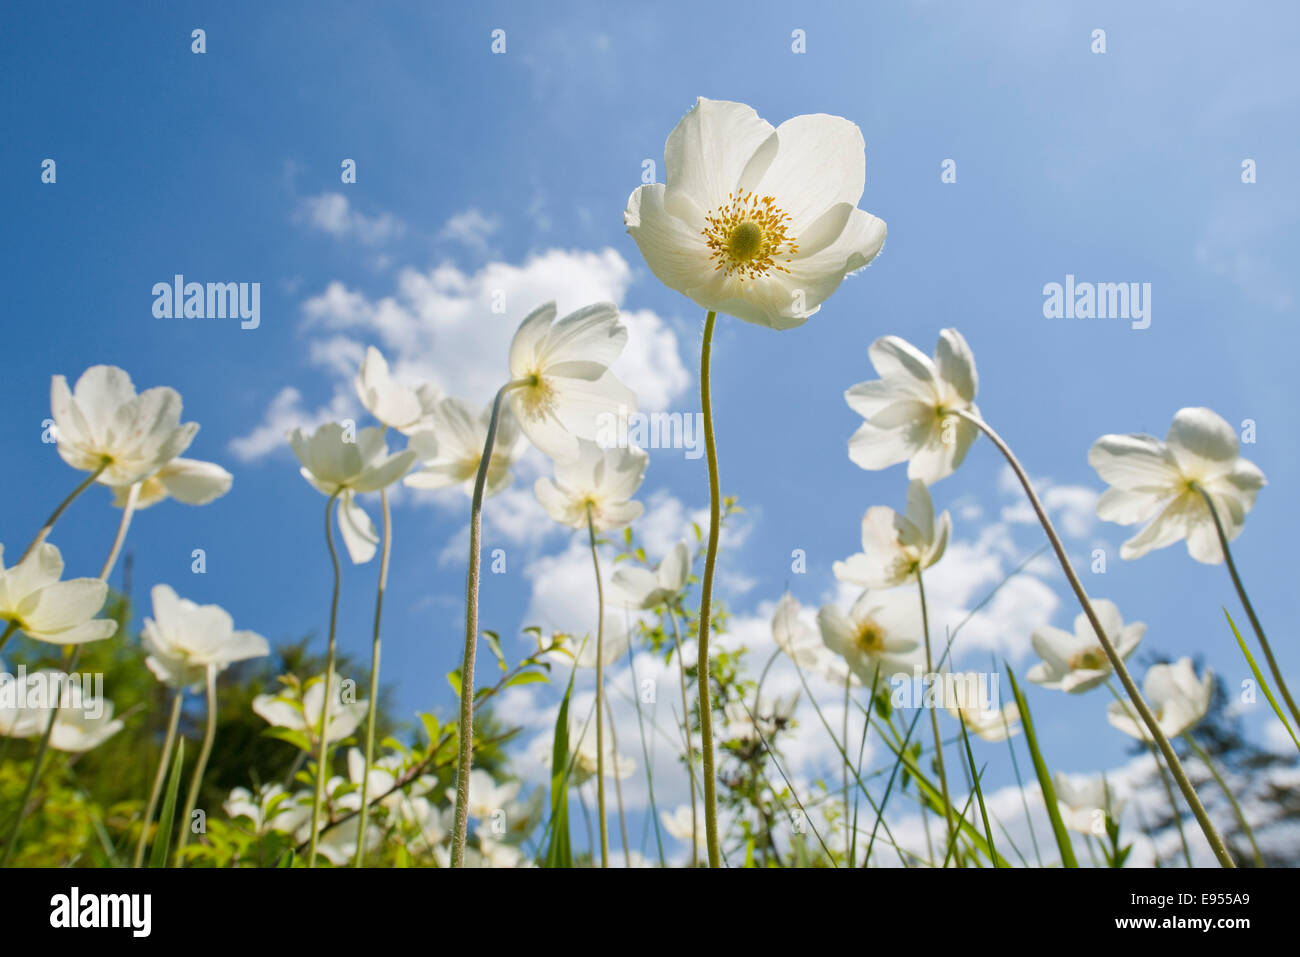 Snowdrop Anemones (Anemone sylvestris) flowers against a blue sky, Thuringia, Germany Stock Photo